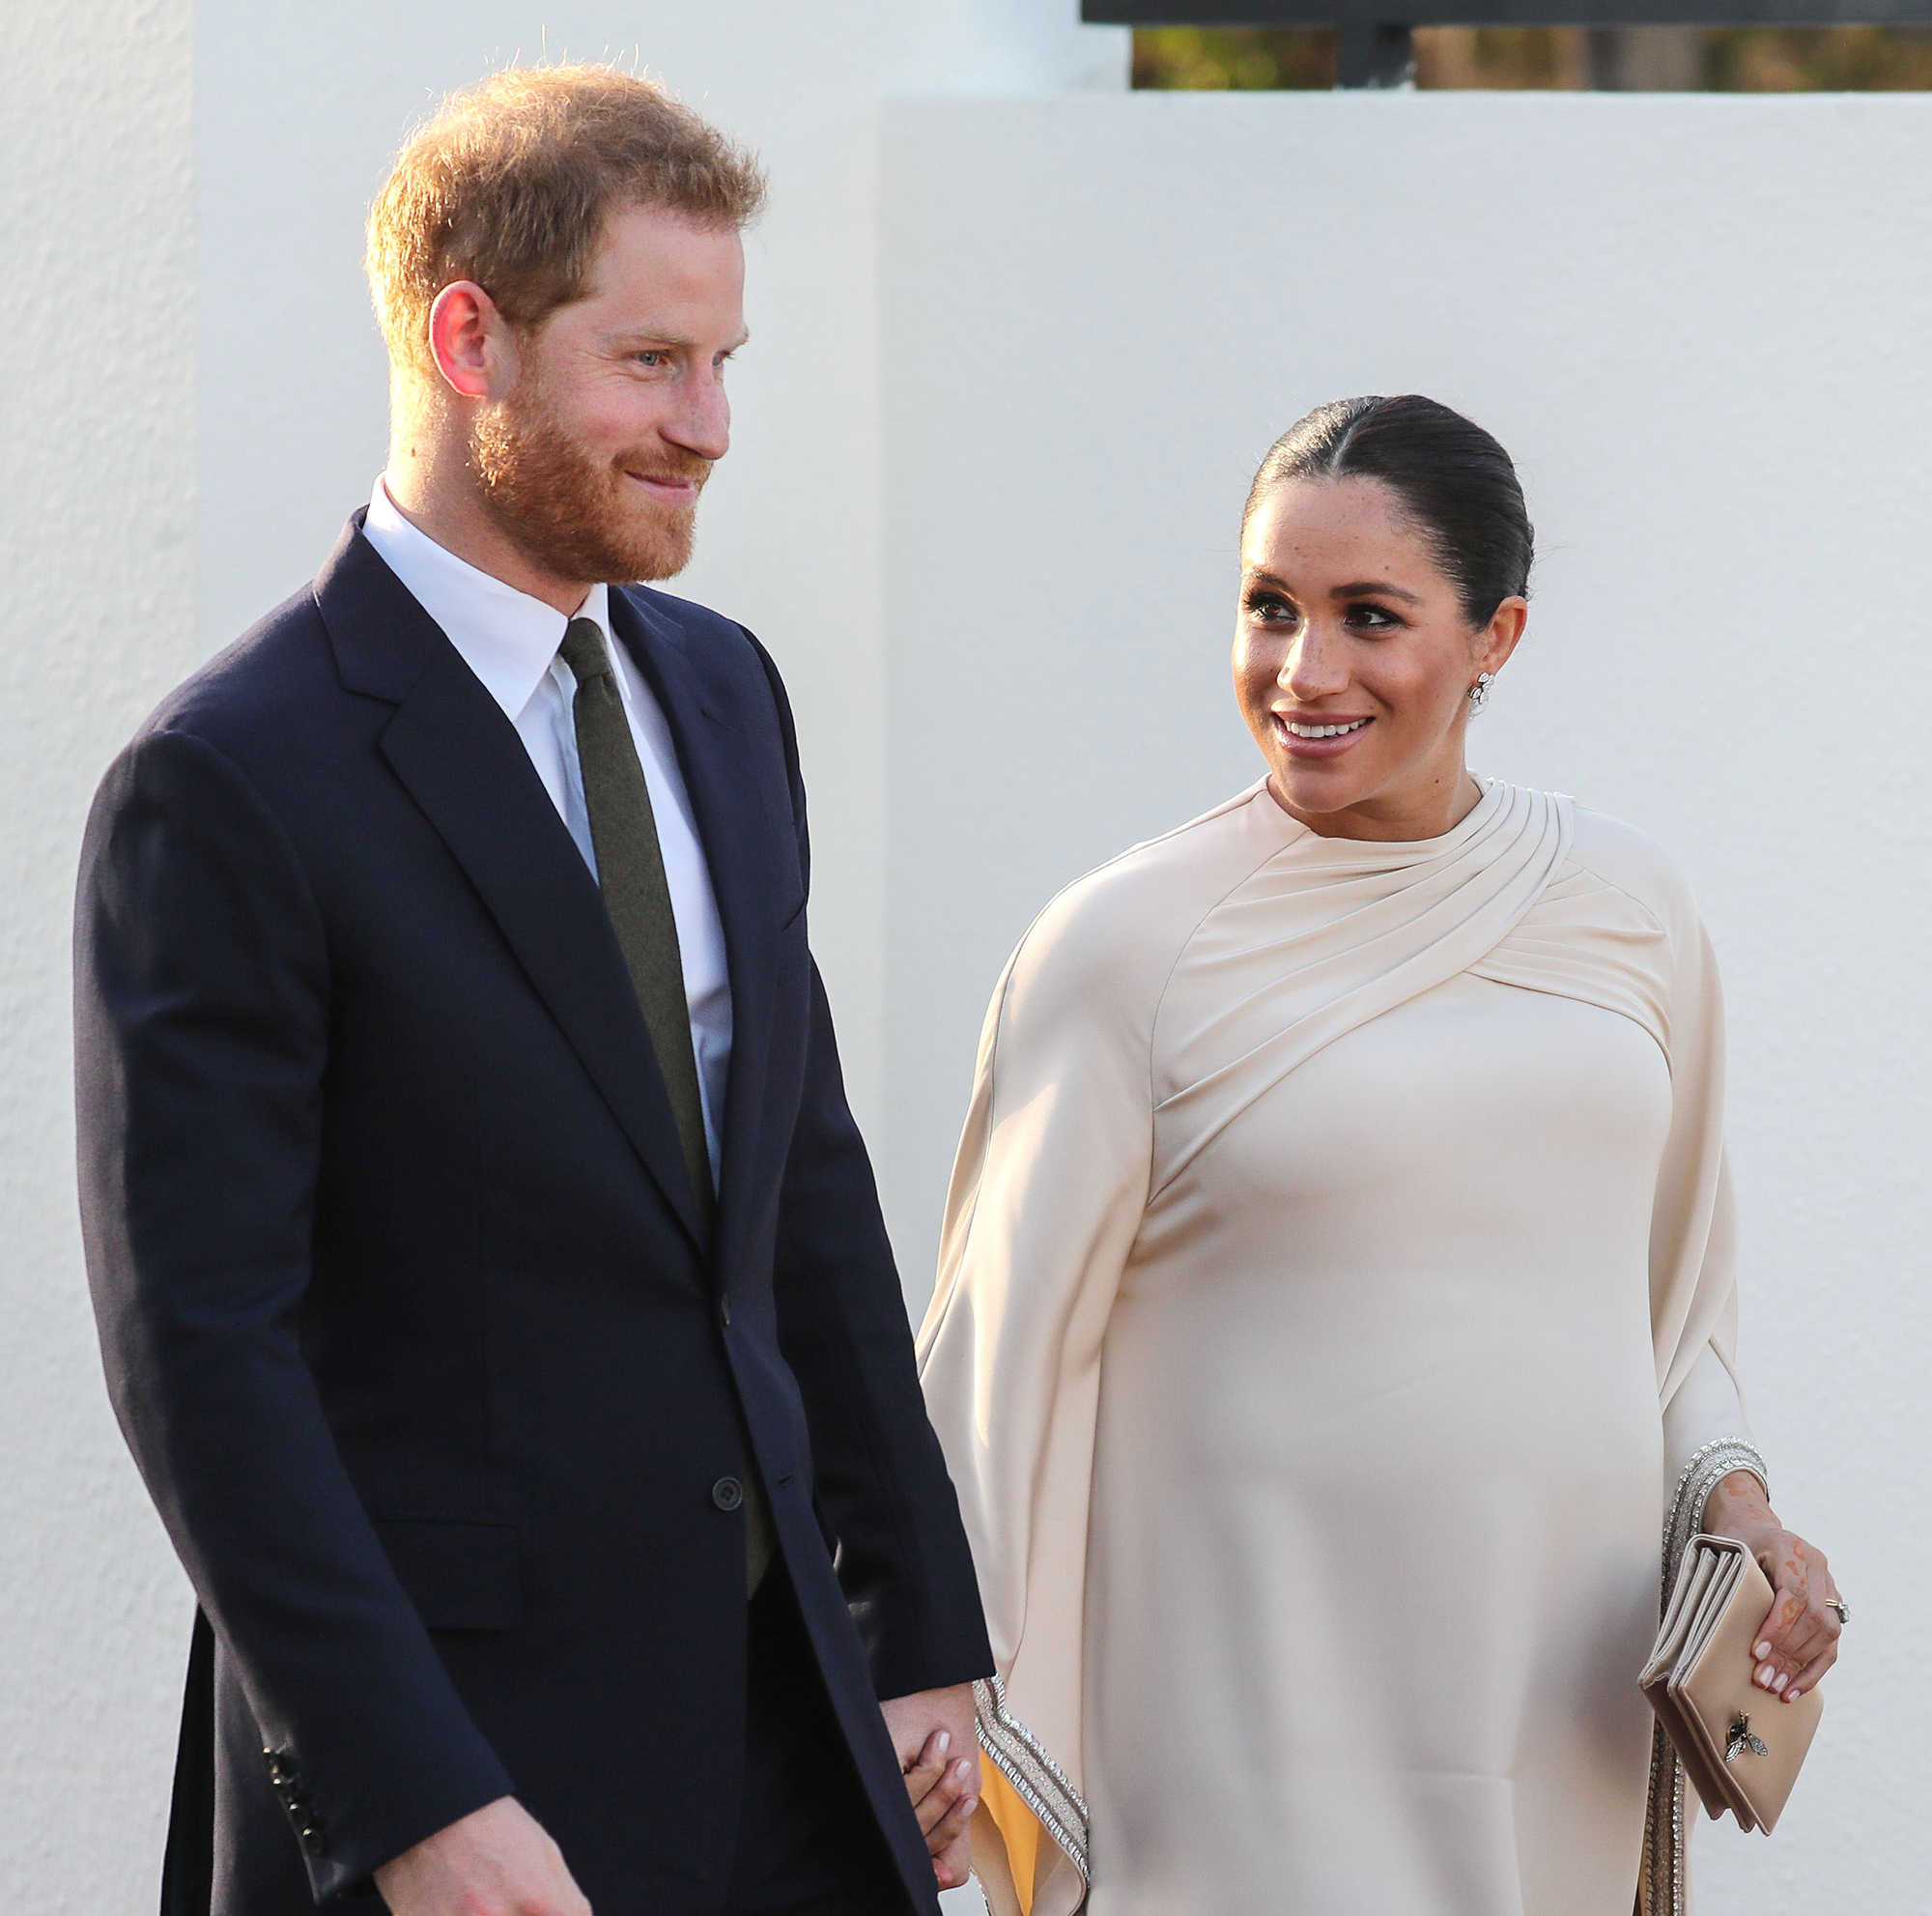 Pregnant Meghan Markle, Prince Harry Are 'Thrilled' to Have Daughter